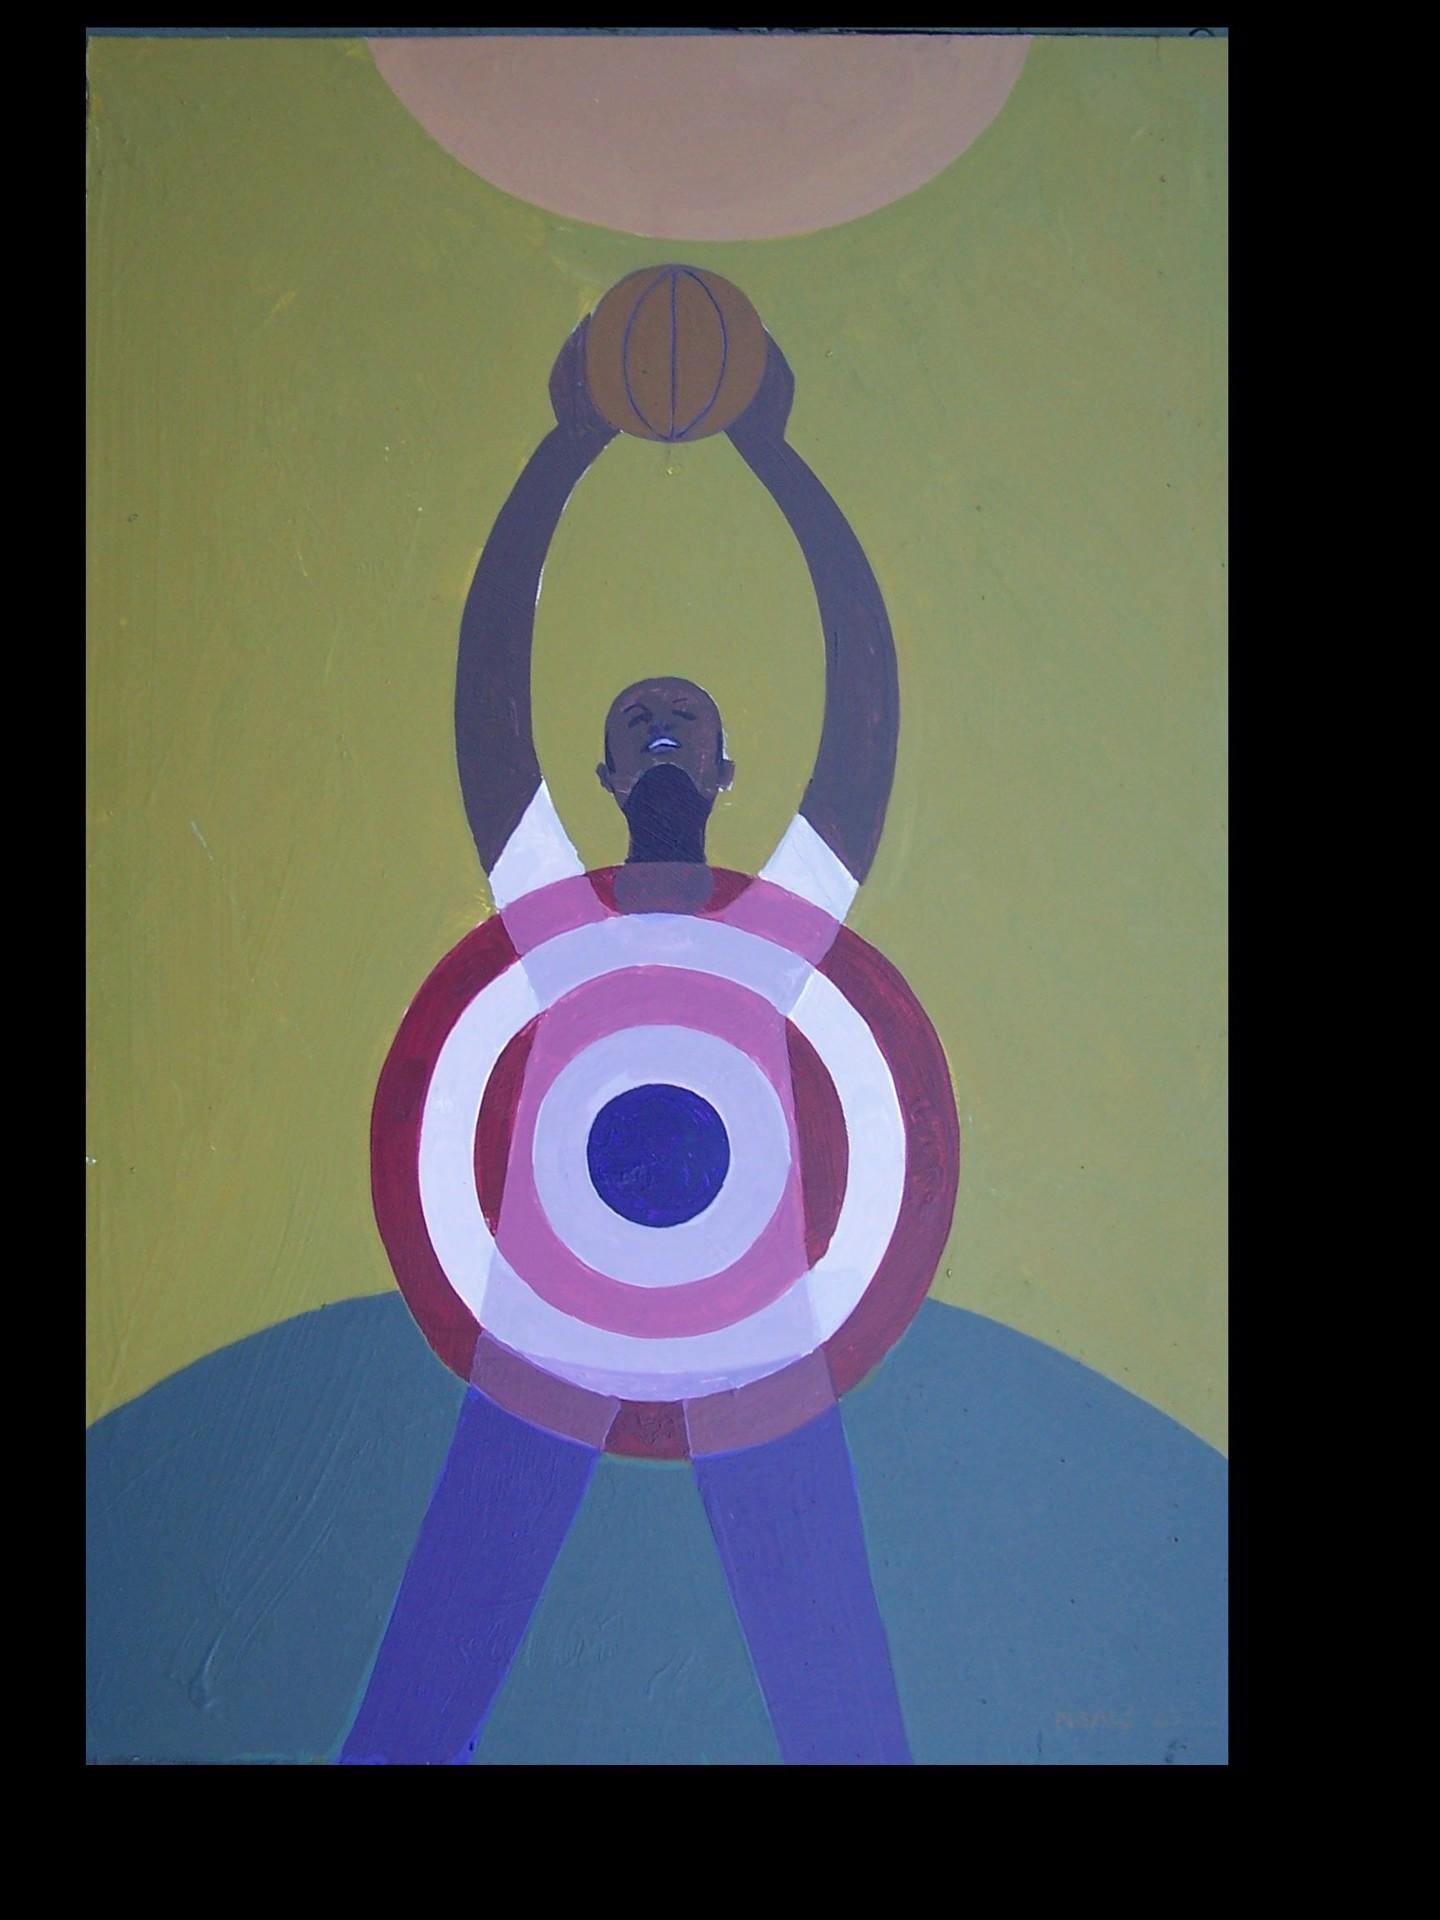 Hoops Target - Art by Otto Neals